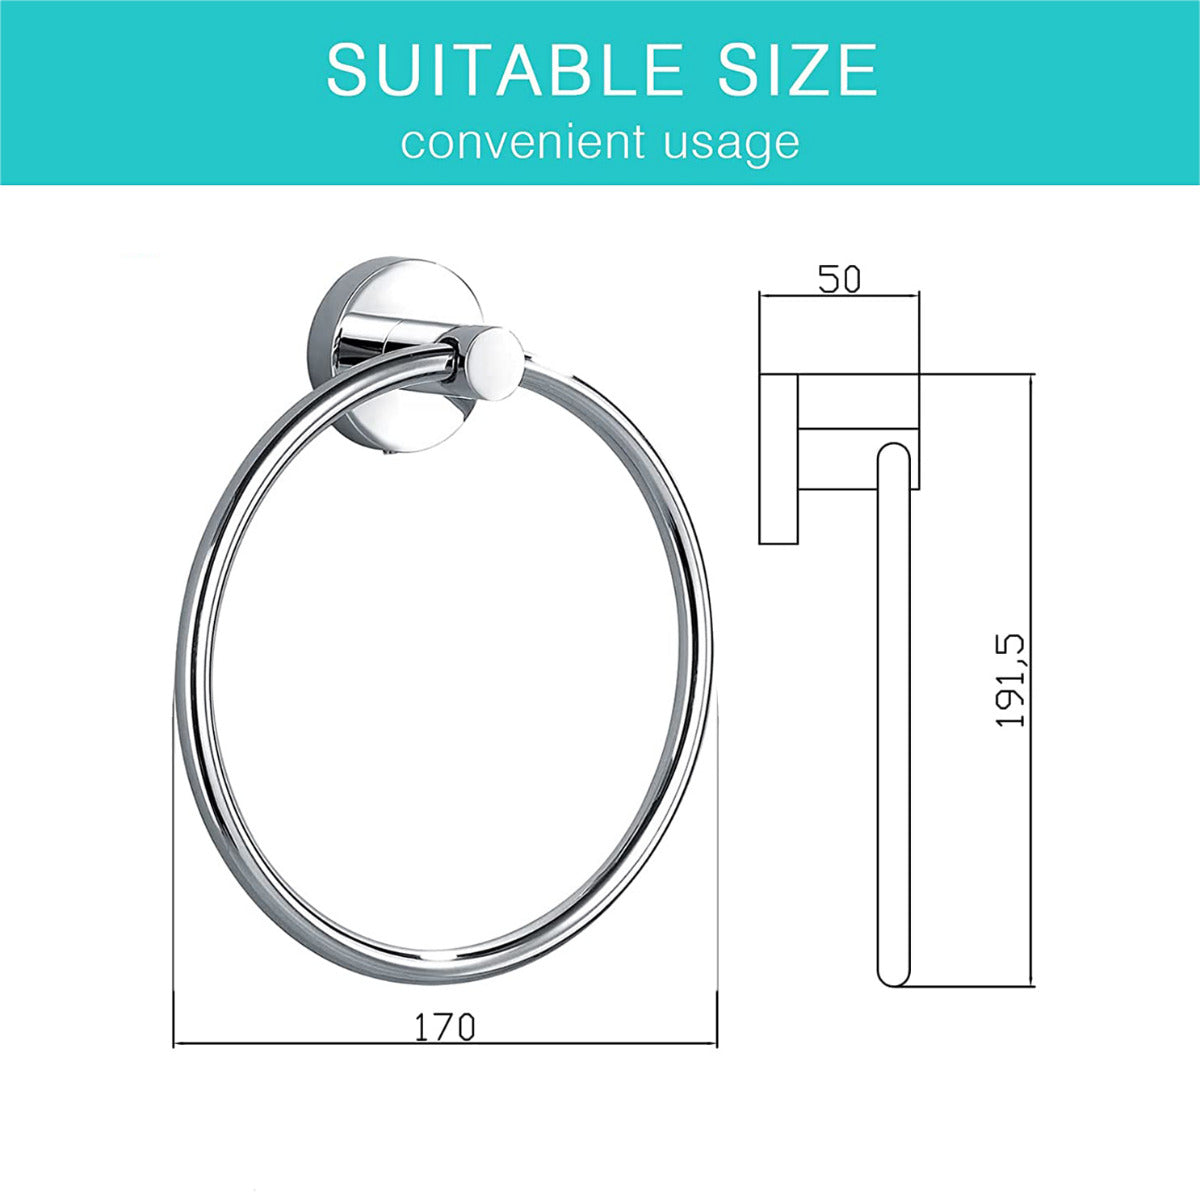 JassferryJASSFERRY Wall Mounted Towel Ring Luxury Modern Design Polished ChromeWall Mounted Towel Ring